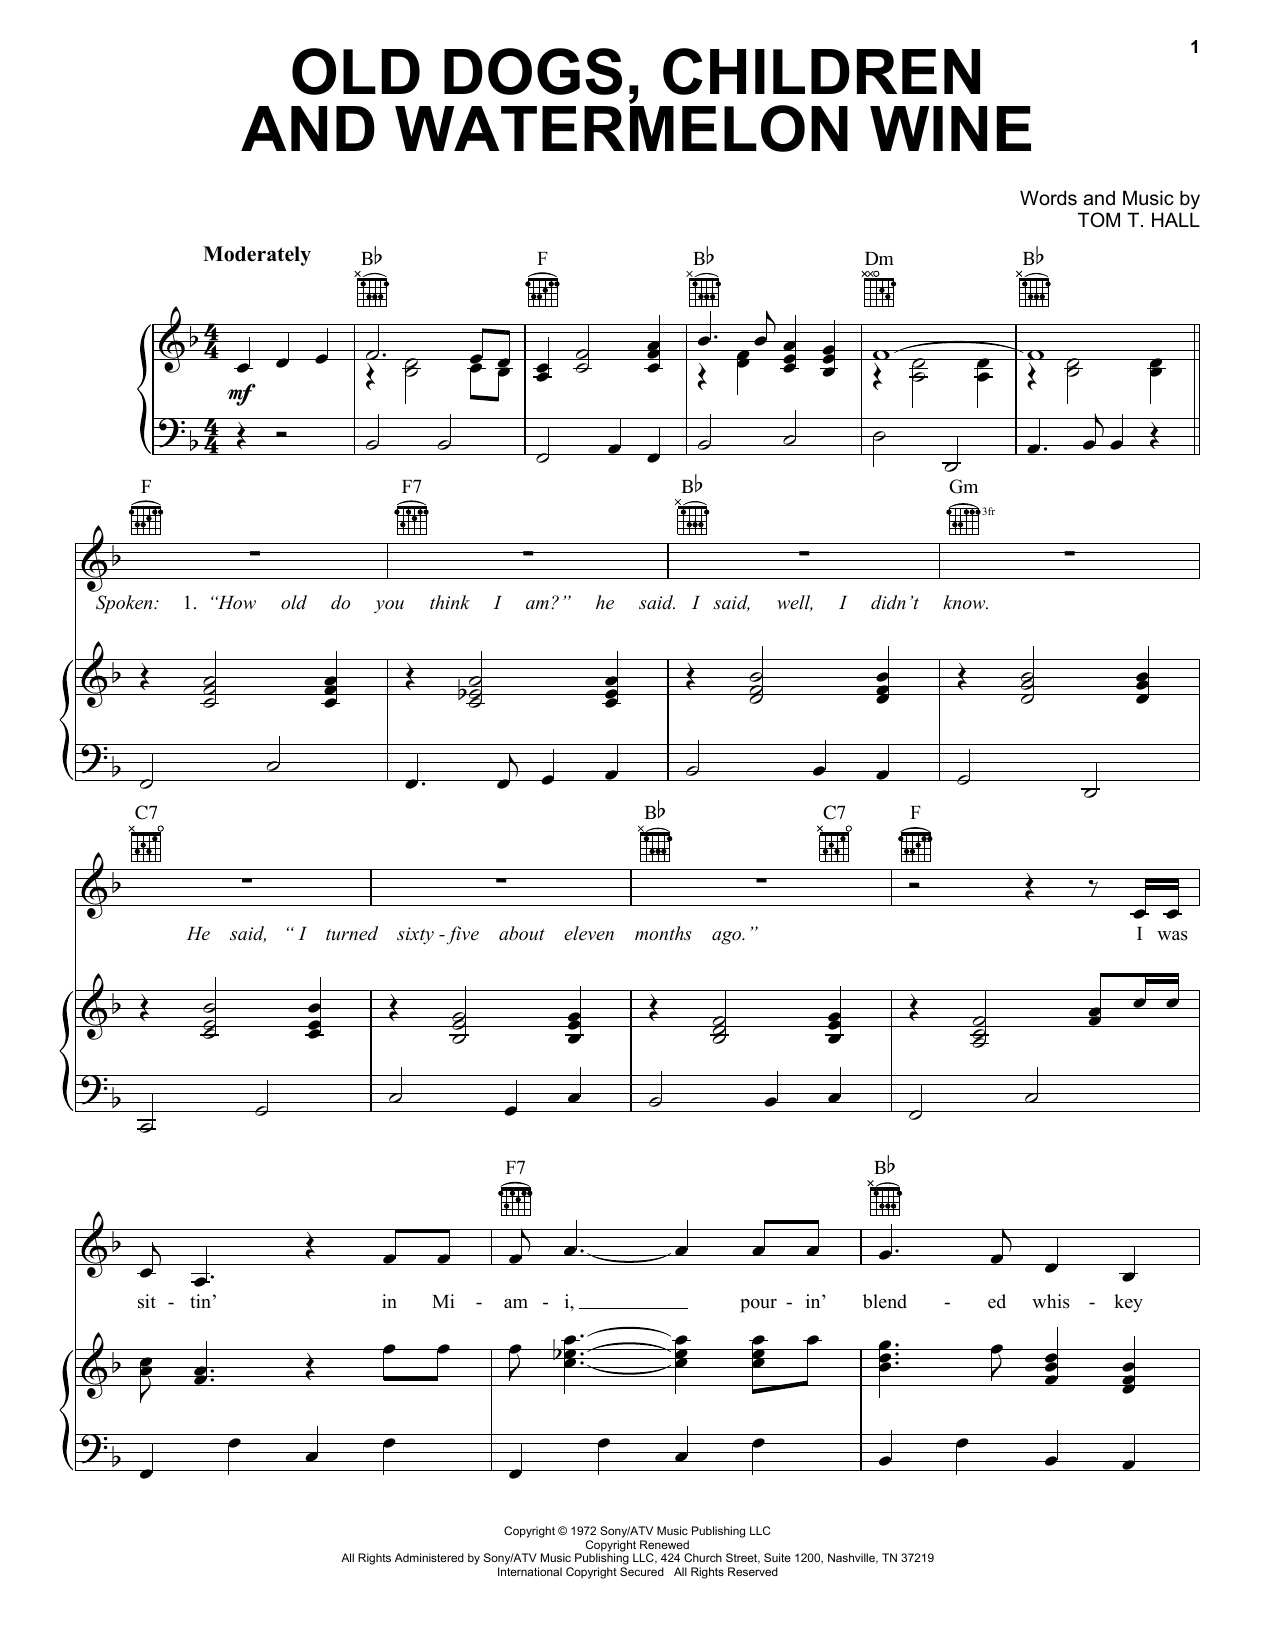 Download Tom T. Hall Old Dogs, Children And Watermelon Wine Sheet Music